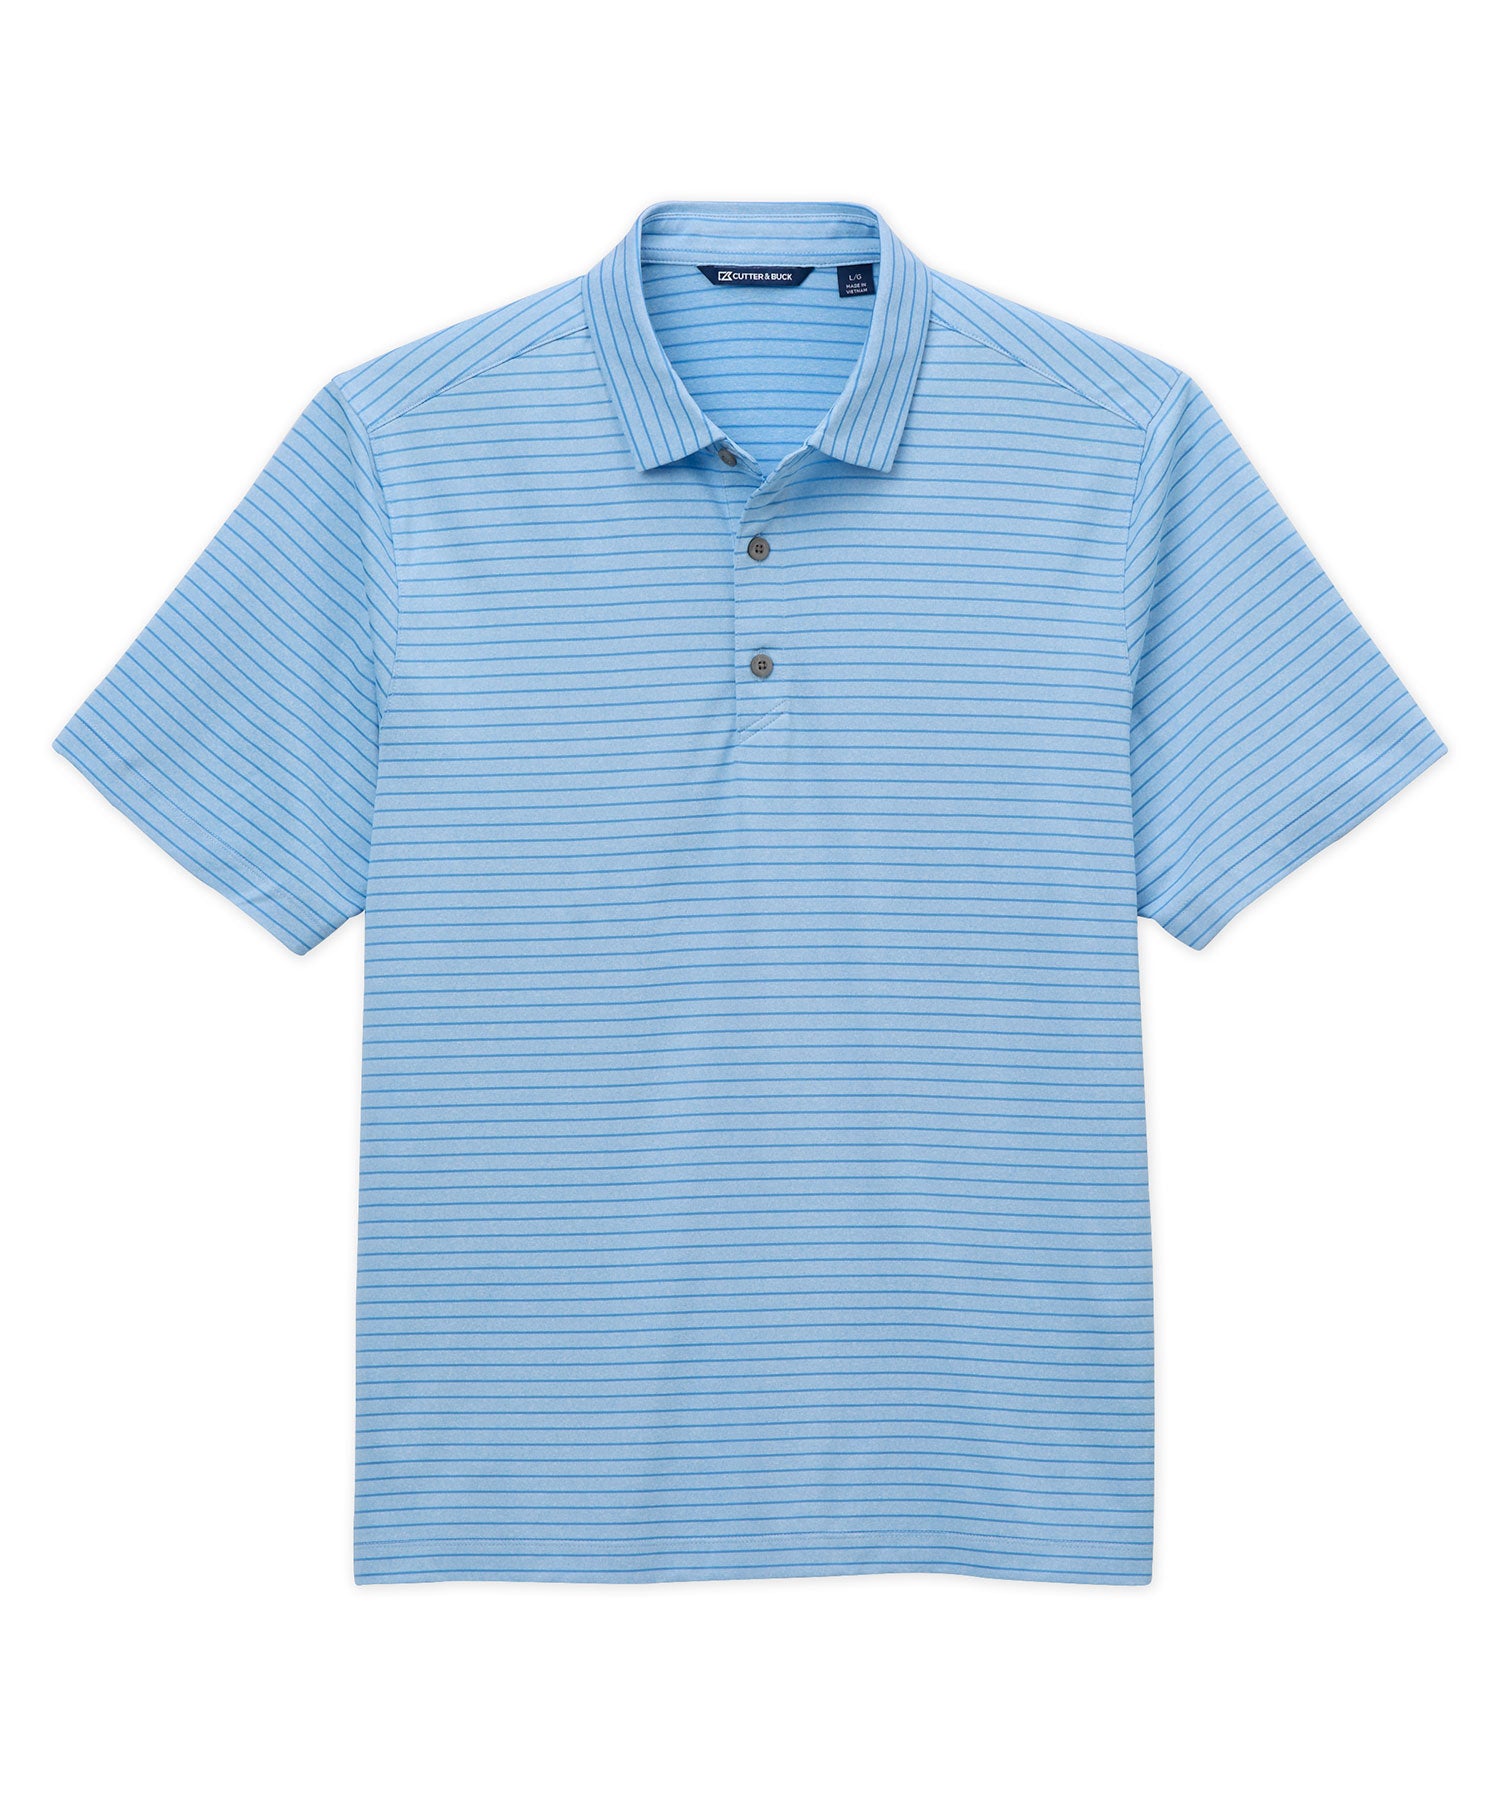 Cutter & Buck Forge Eco Heather Stripe Pattern Stretch Recycled Polo, Men's Big & Tall